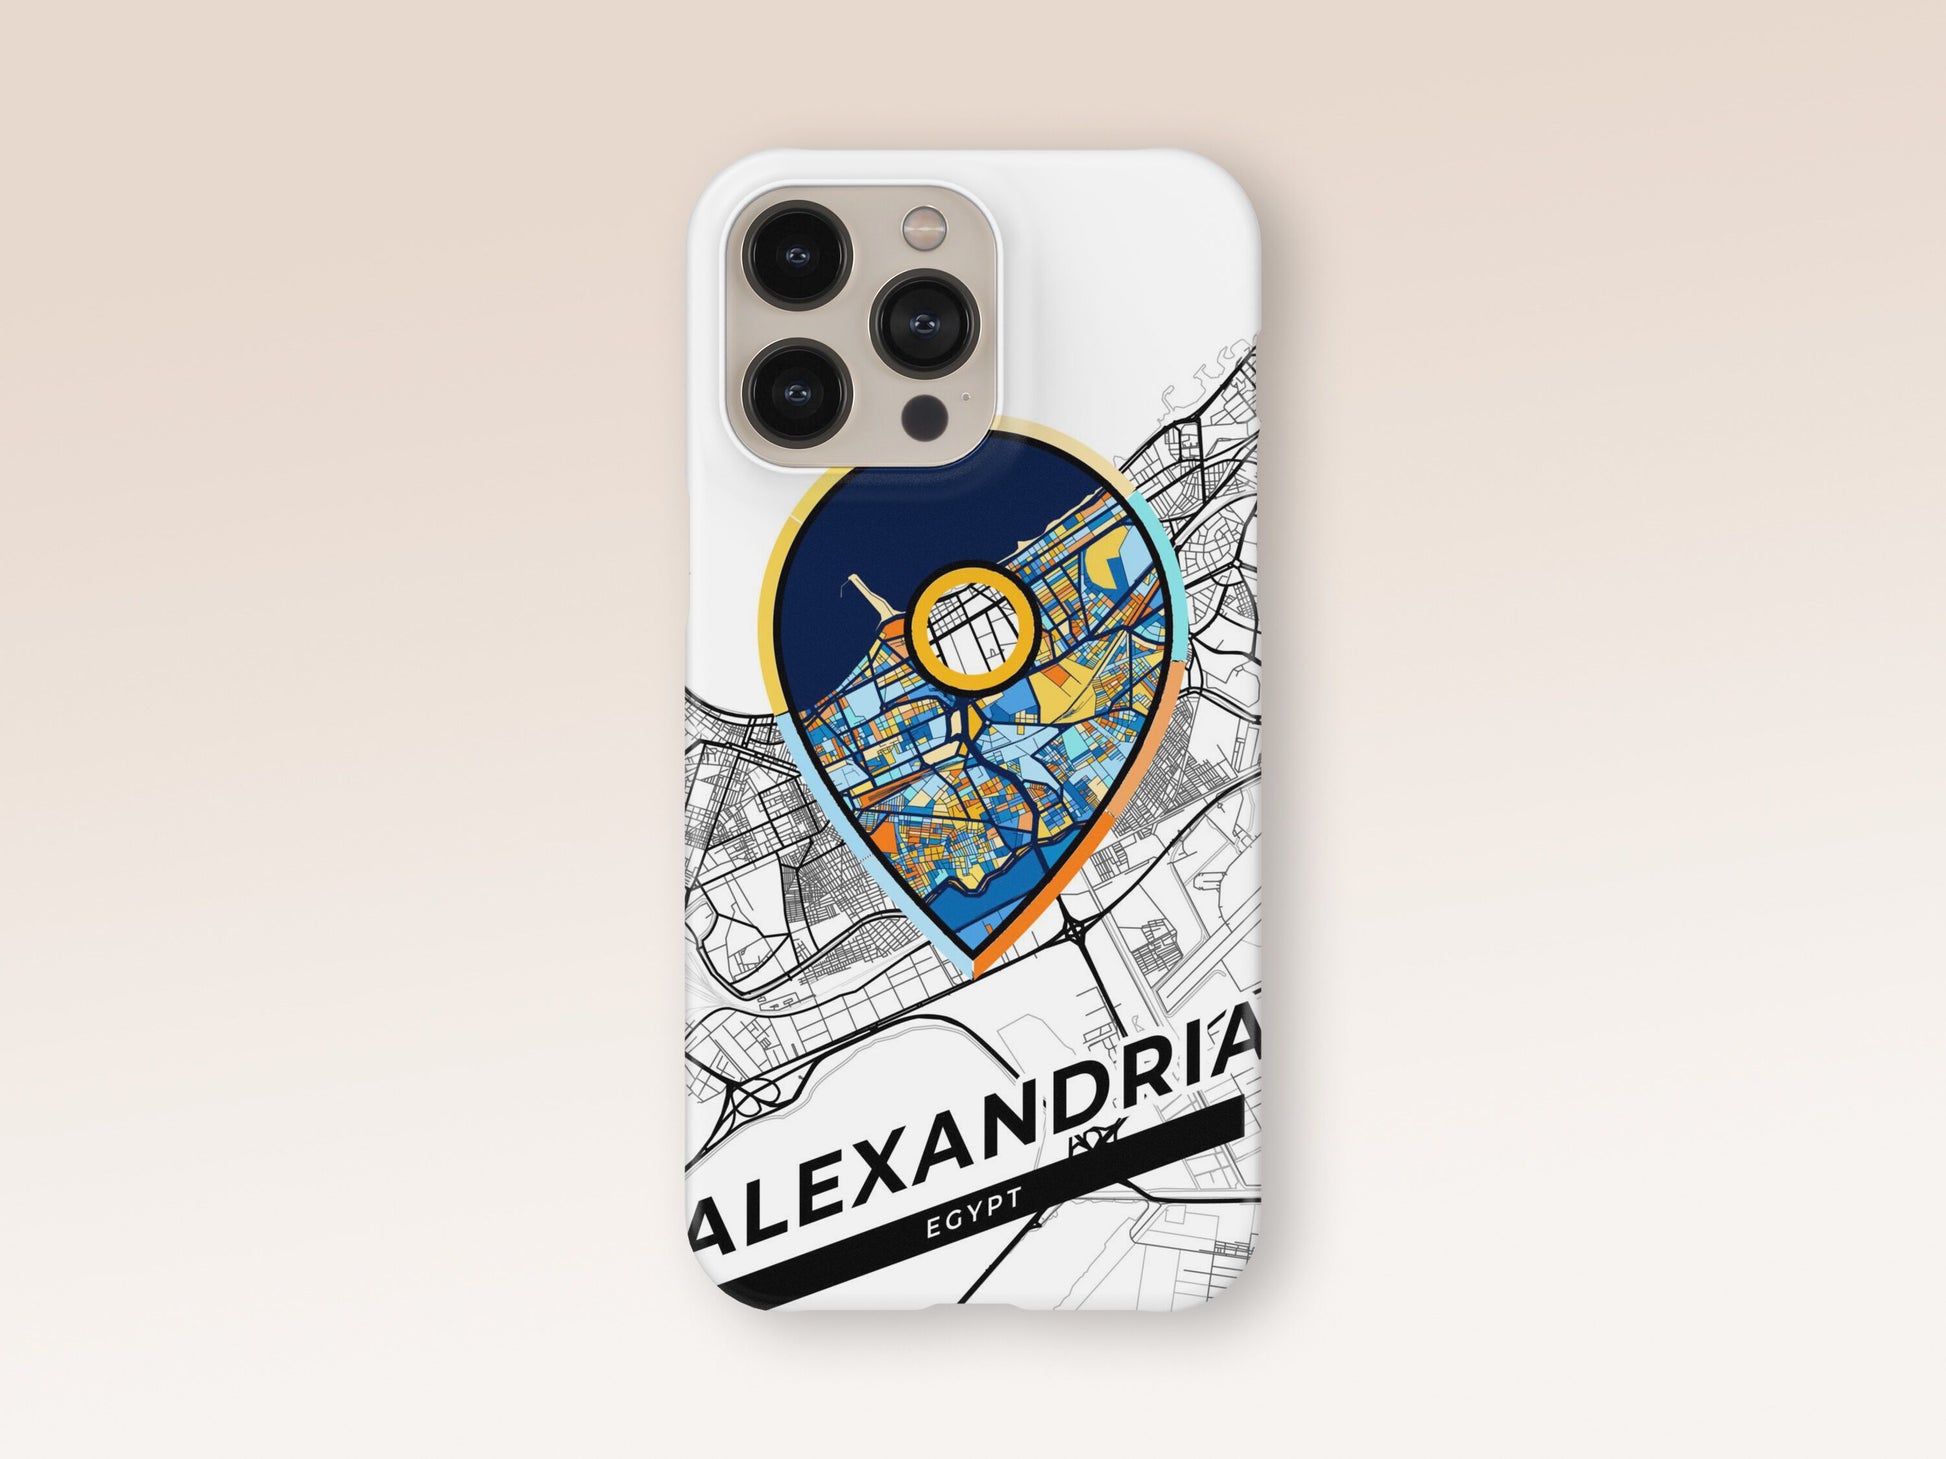 Alexandria Egypt slim phone case with colorful icon. Birthday, wedding or housewarming gift. Couple match cases. 1